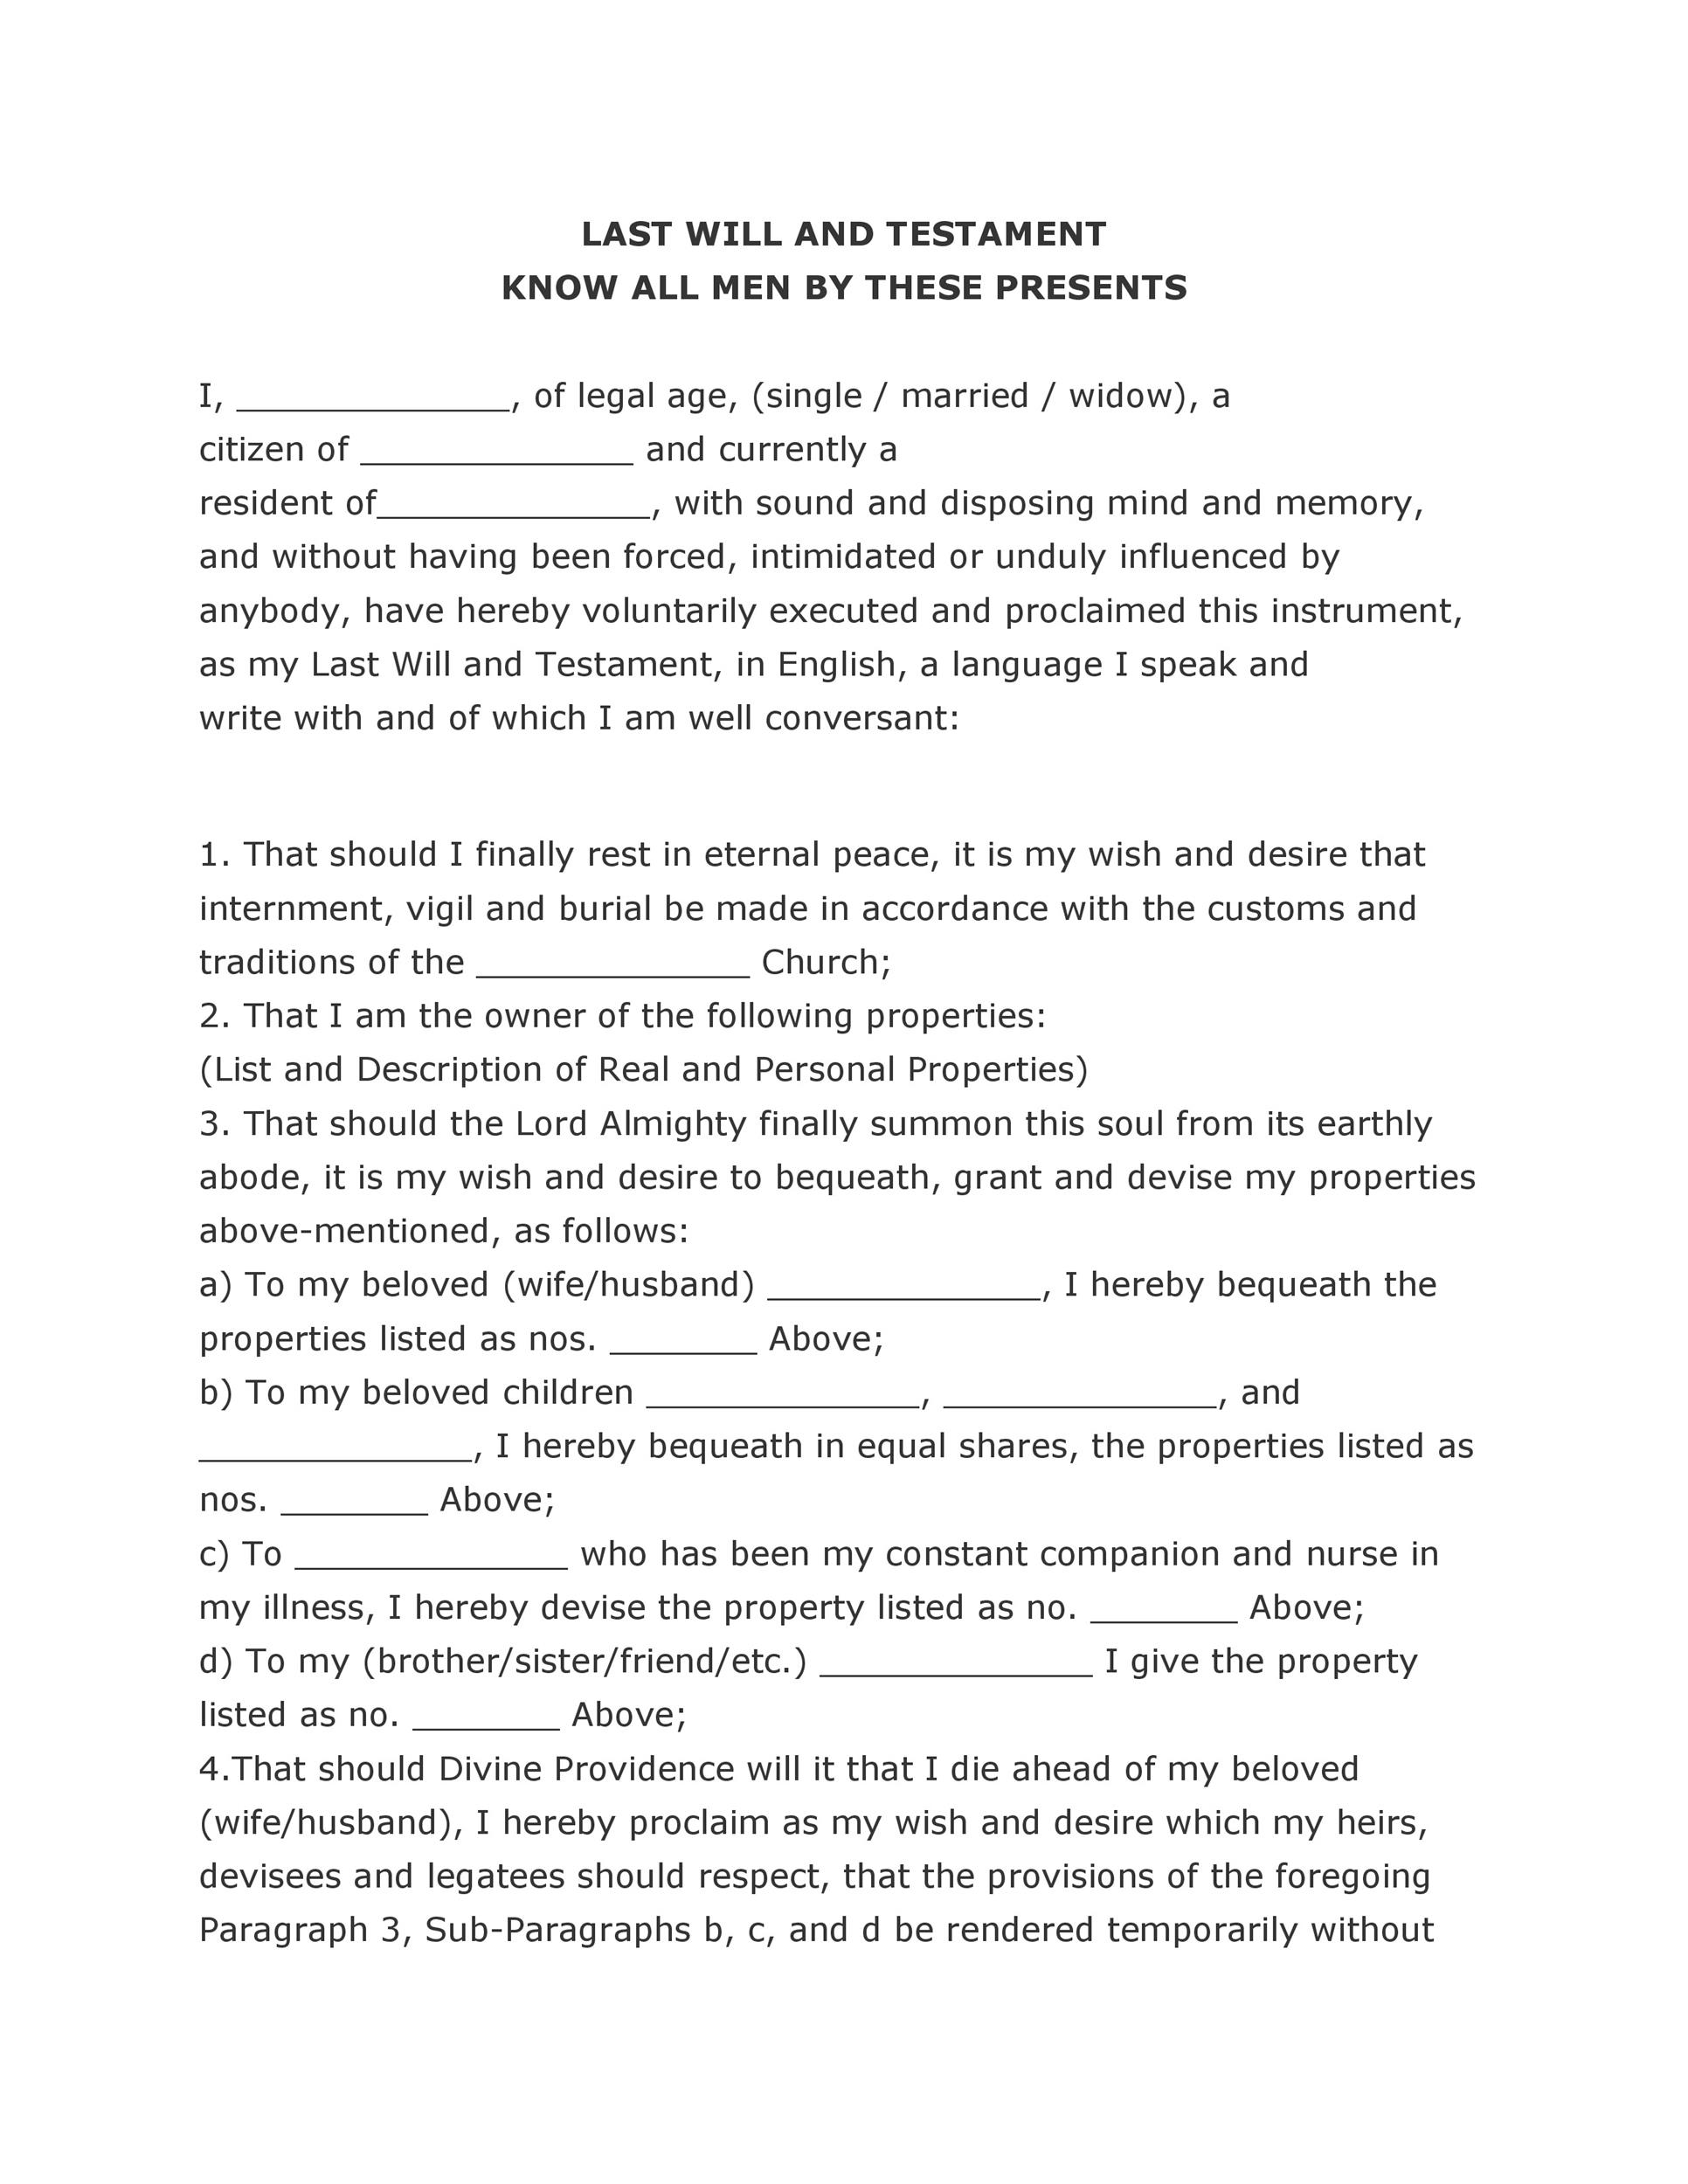 free-mississippi-last-will-and-testament-template-pdf-word-eforms